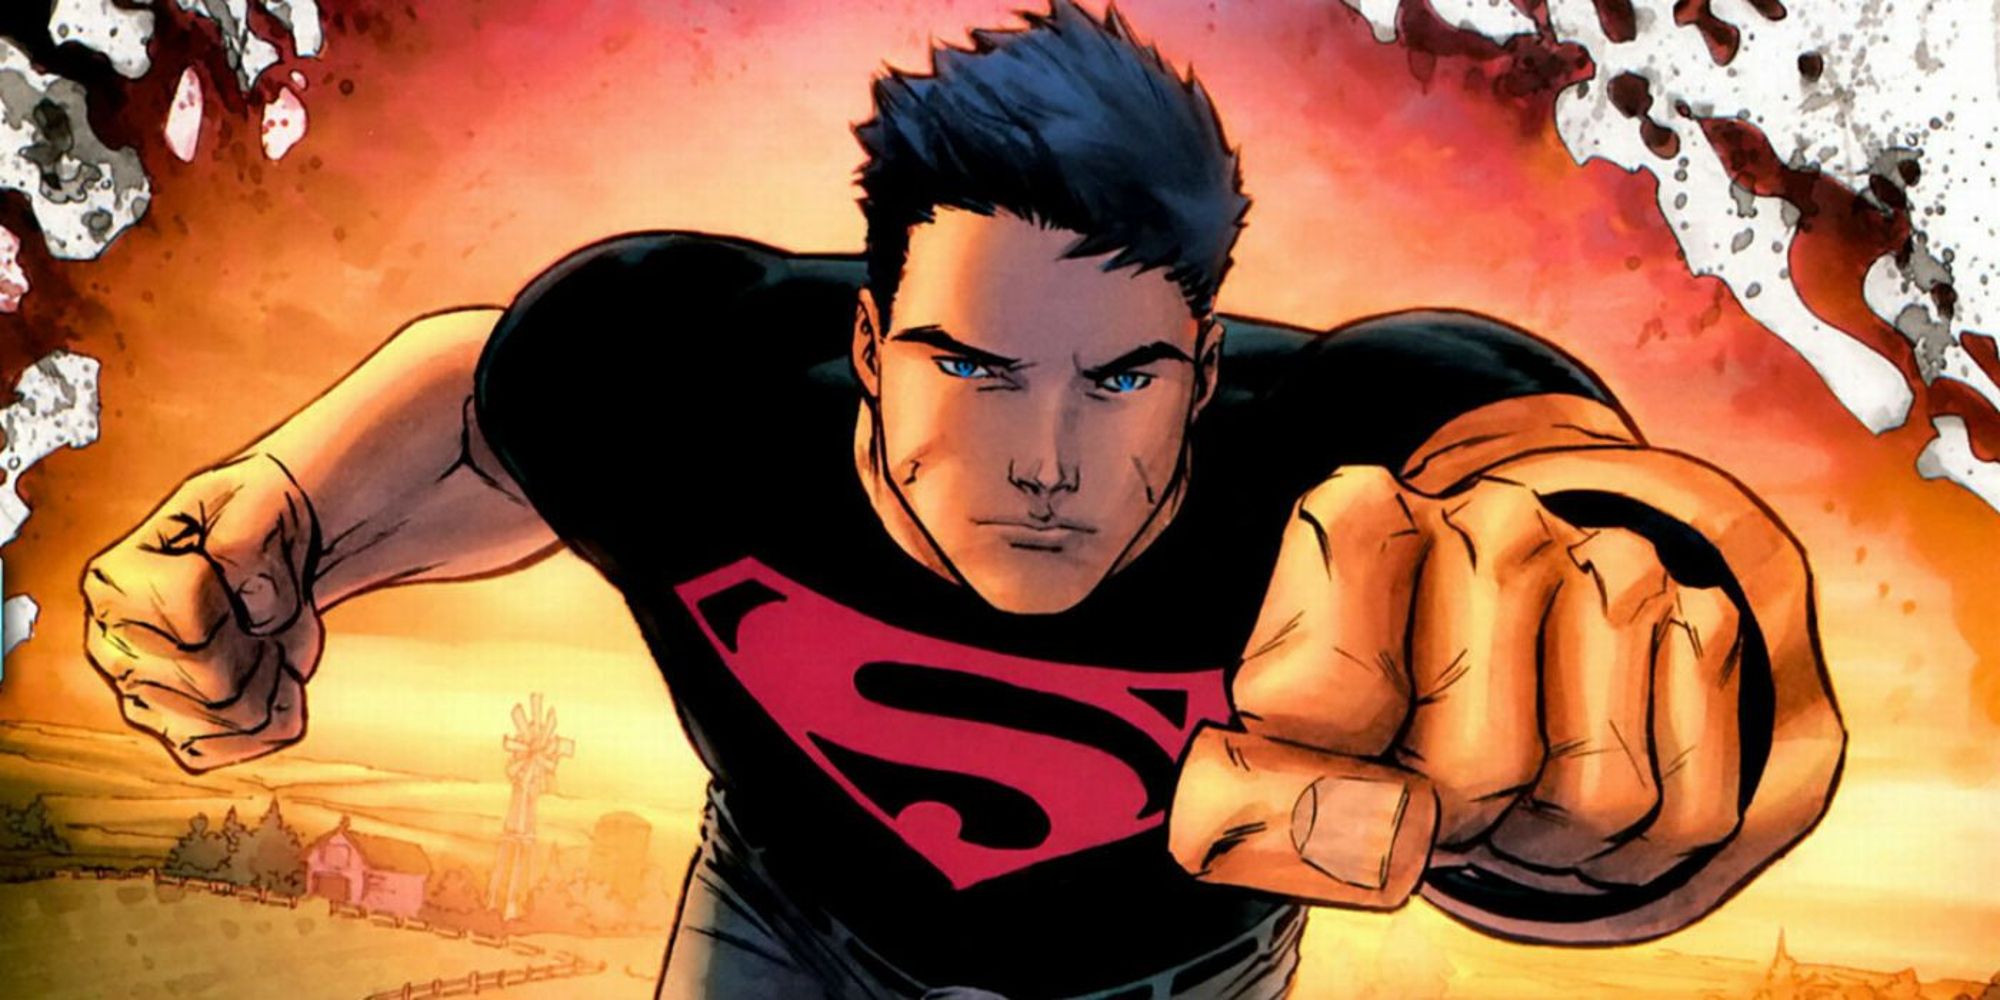 Conner Kent as Superboy in Smallville in DC comics